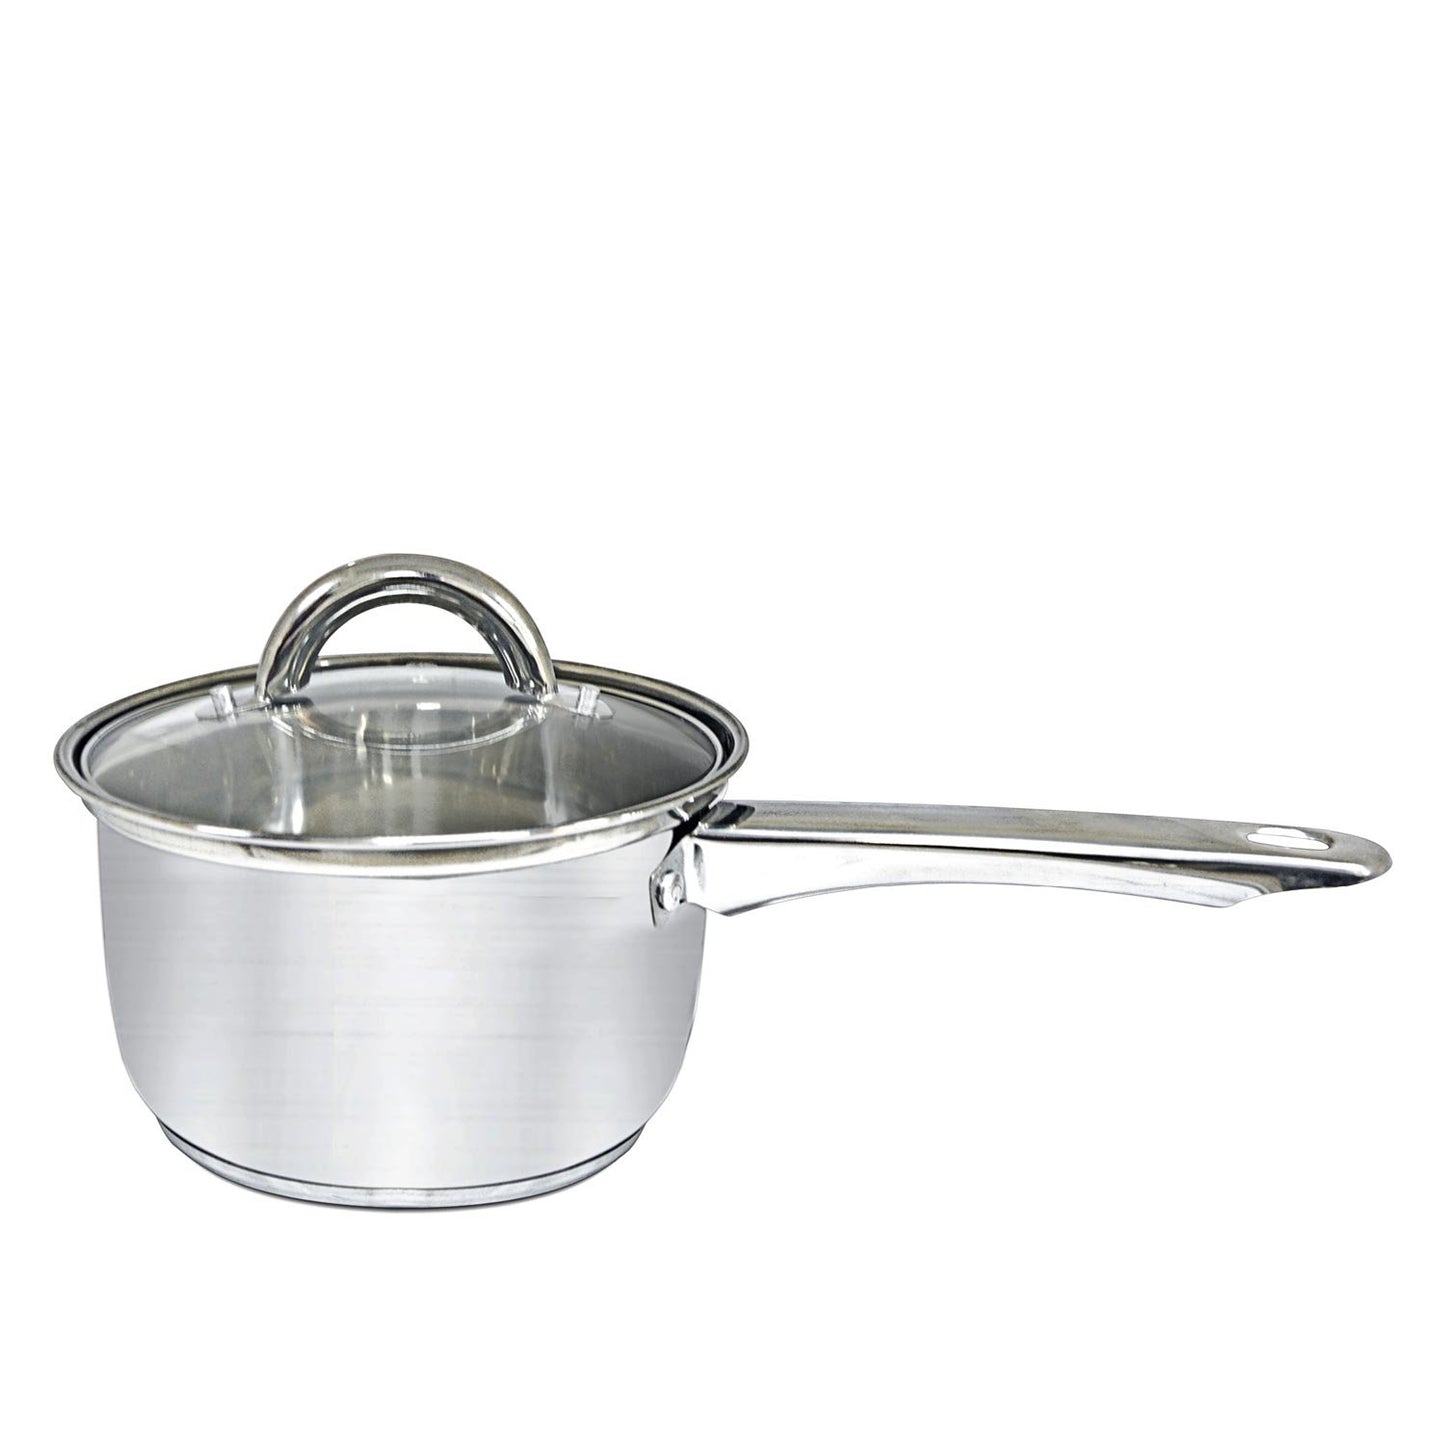 MASTERFLEX 16 CM STAINLESS STEEL INDUCTION SAUCEPAN WITH GLASS LID